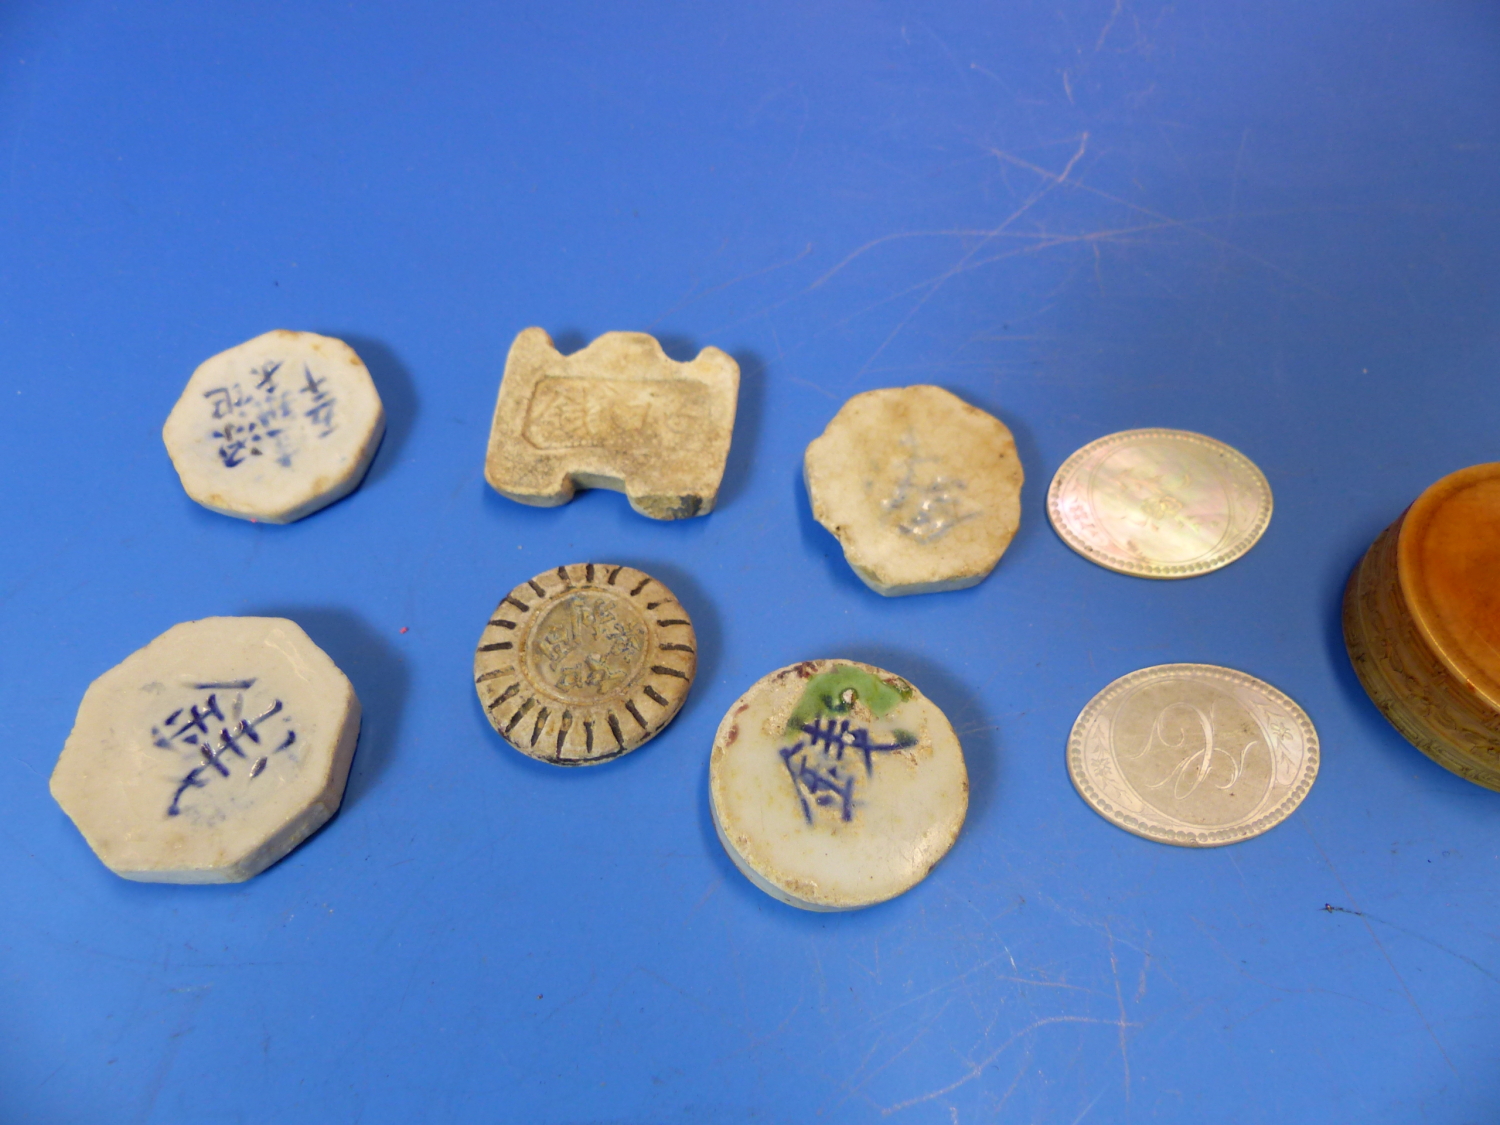 SIX CHINESE PORCELAIN GAMBLING TOKENS TOGETHER WITH MOTHER OF PEARL COUNTERS INITIALLED C, SOME - Image 6 of 10